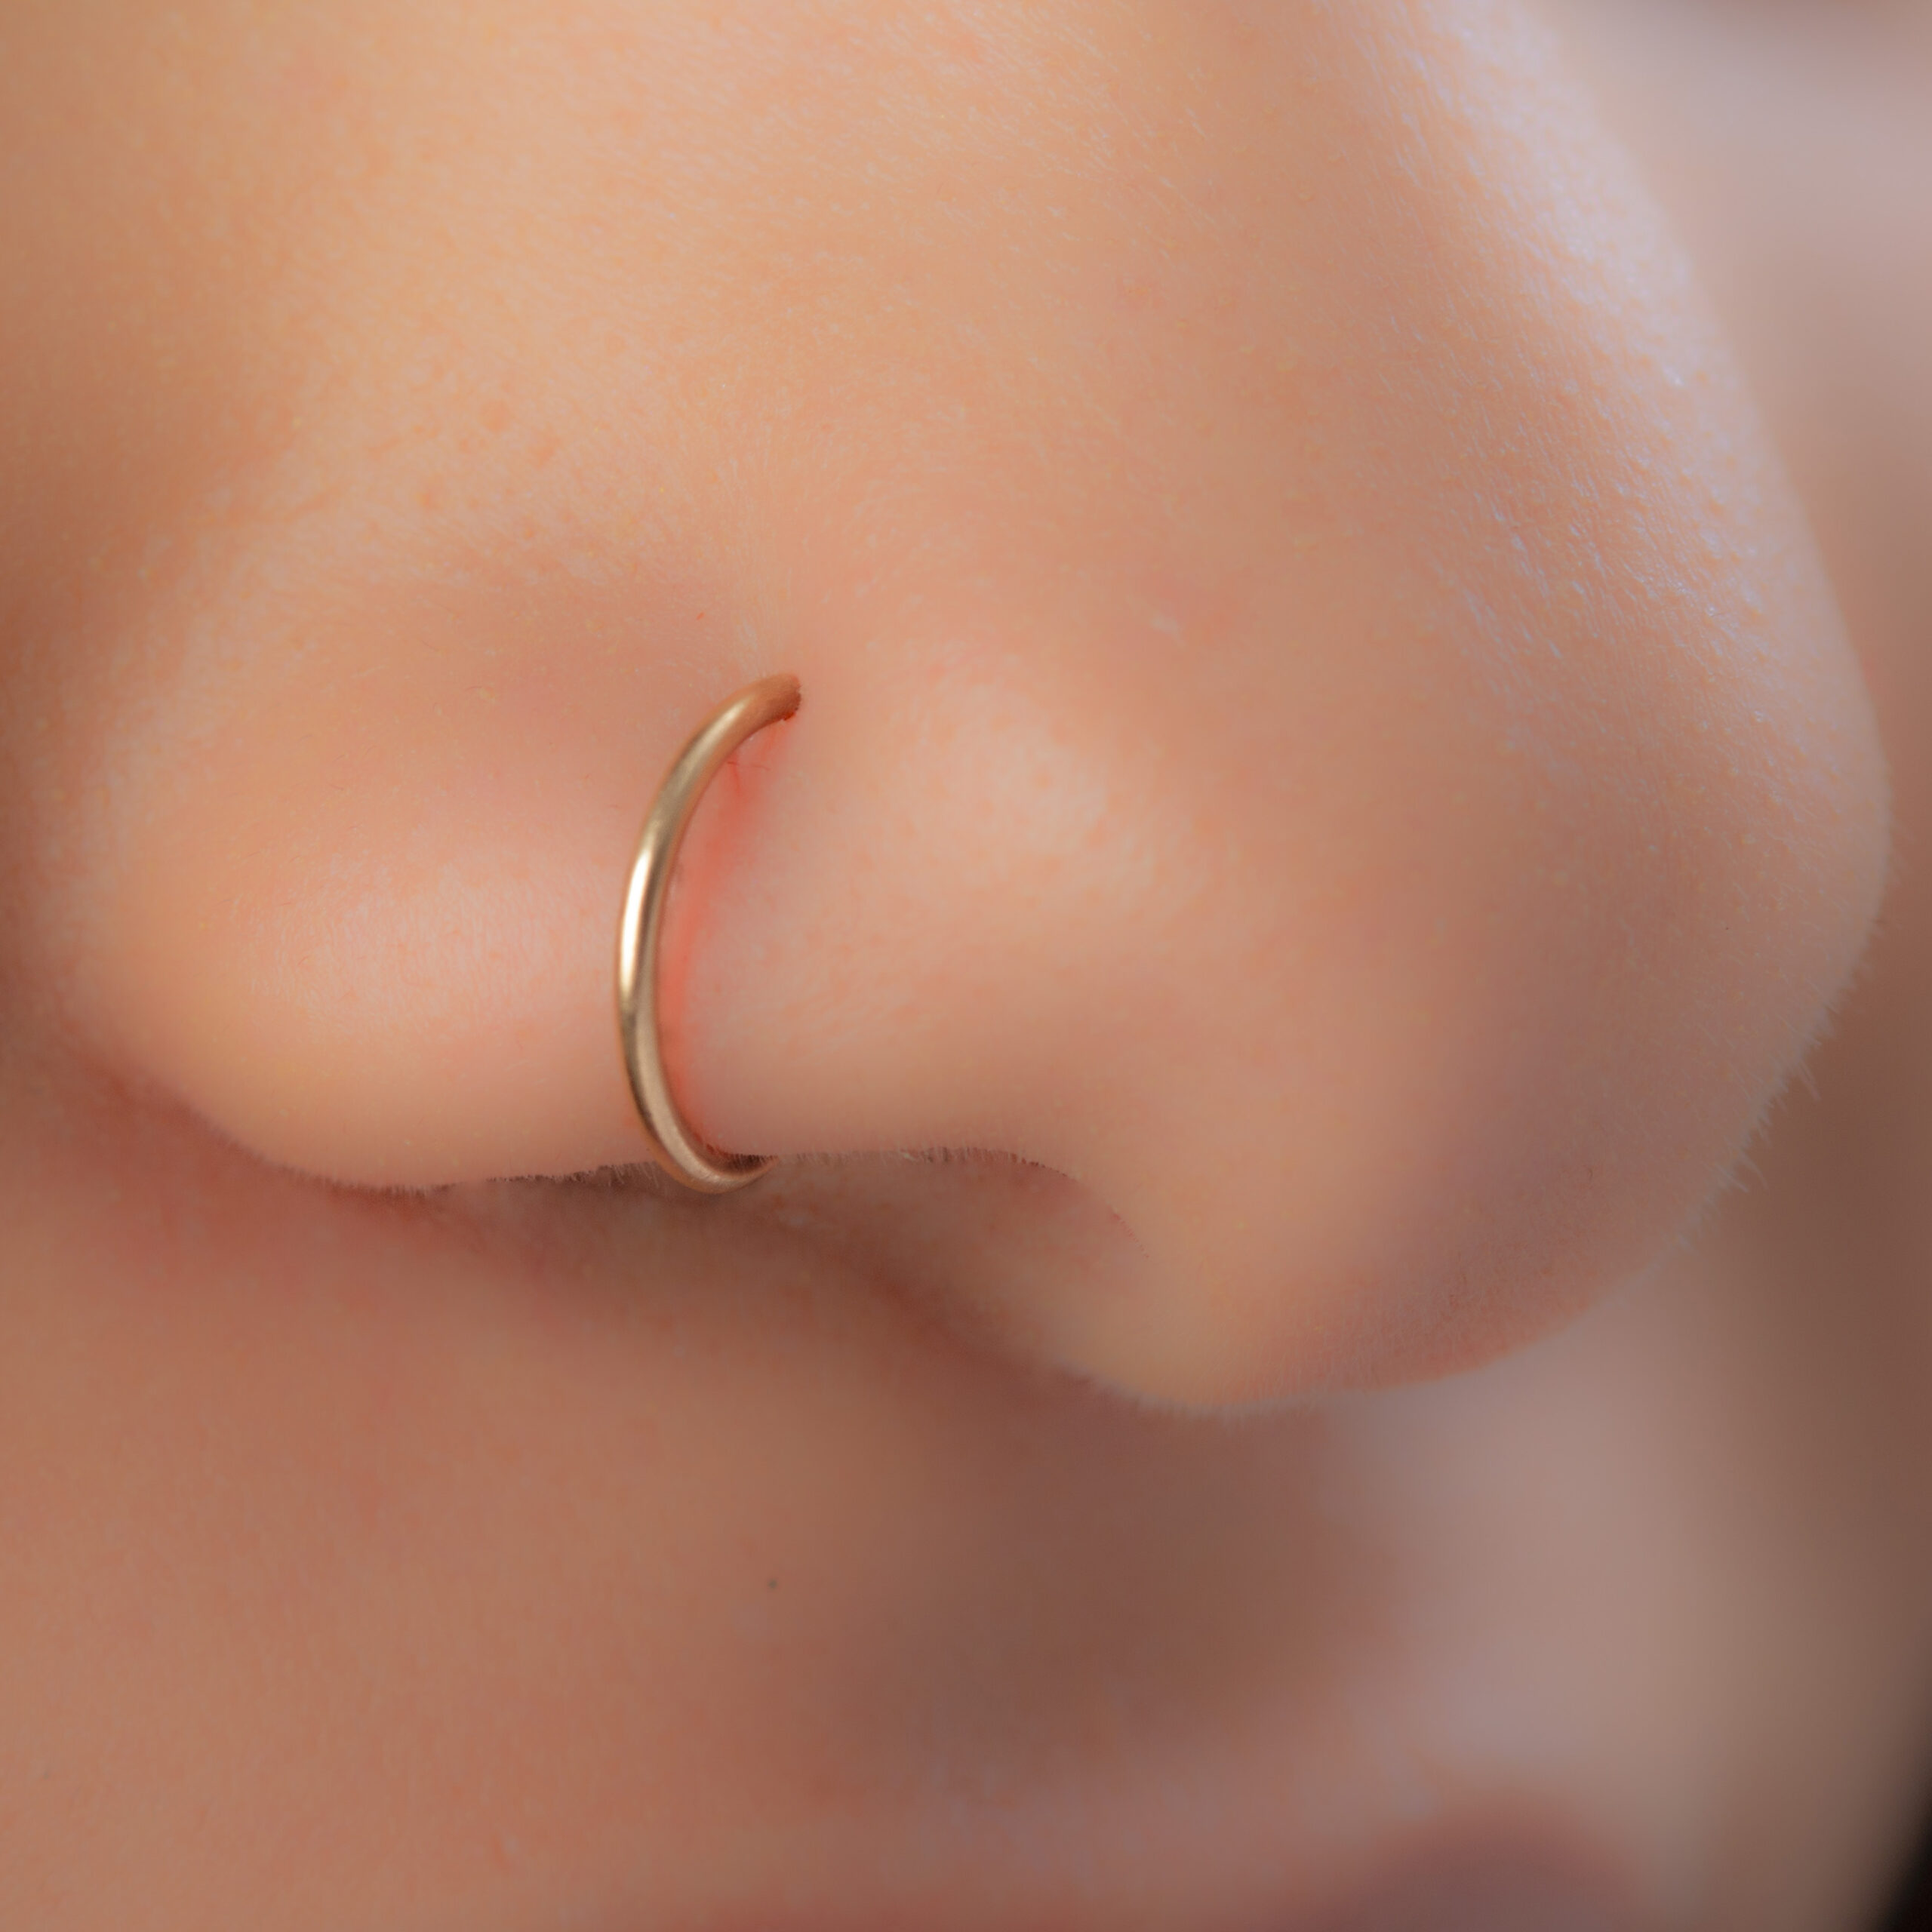 Nose Cuff With Gem, Fake Nose Piercing, Crystal Nosecuff, Pierceless, Faux Nose  Ring Jewelry No Piercing Needed, Pierce-less Nose Ring - Etsy | Gold nose  hoop, Cute nose rings, Girls with nose